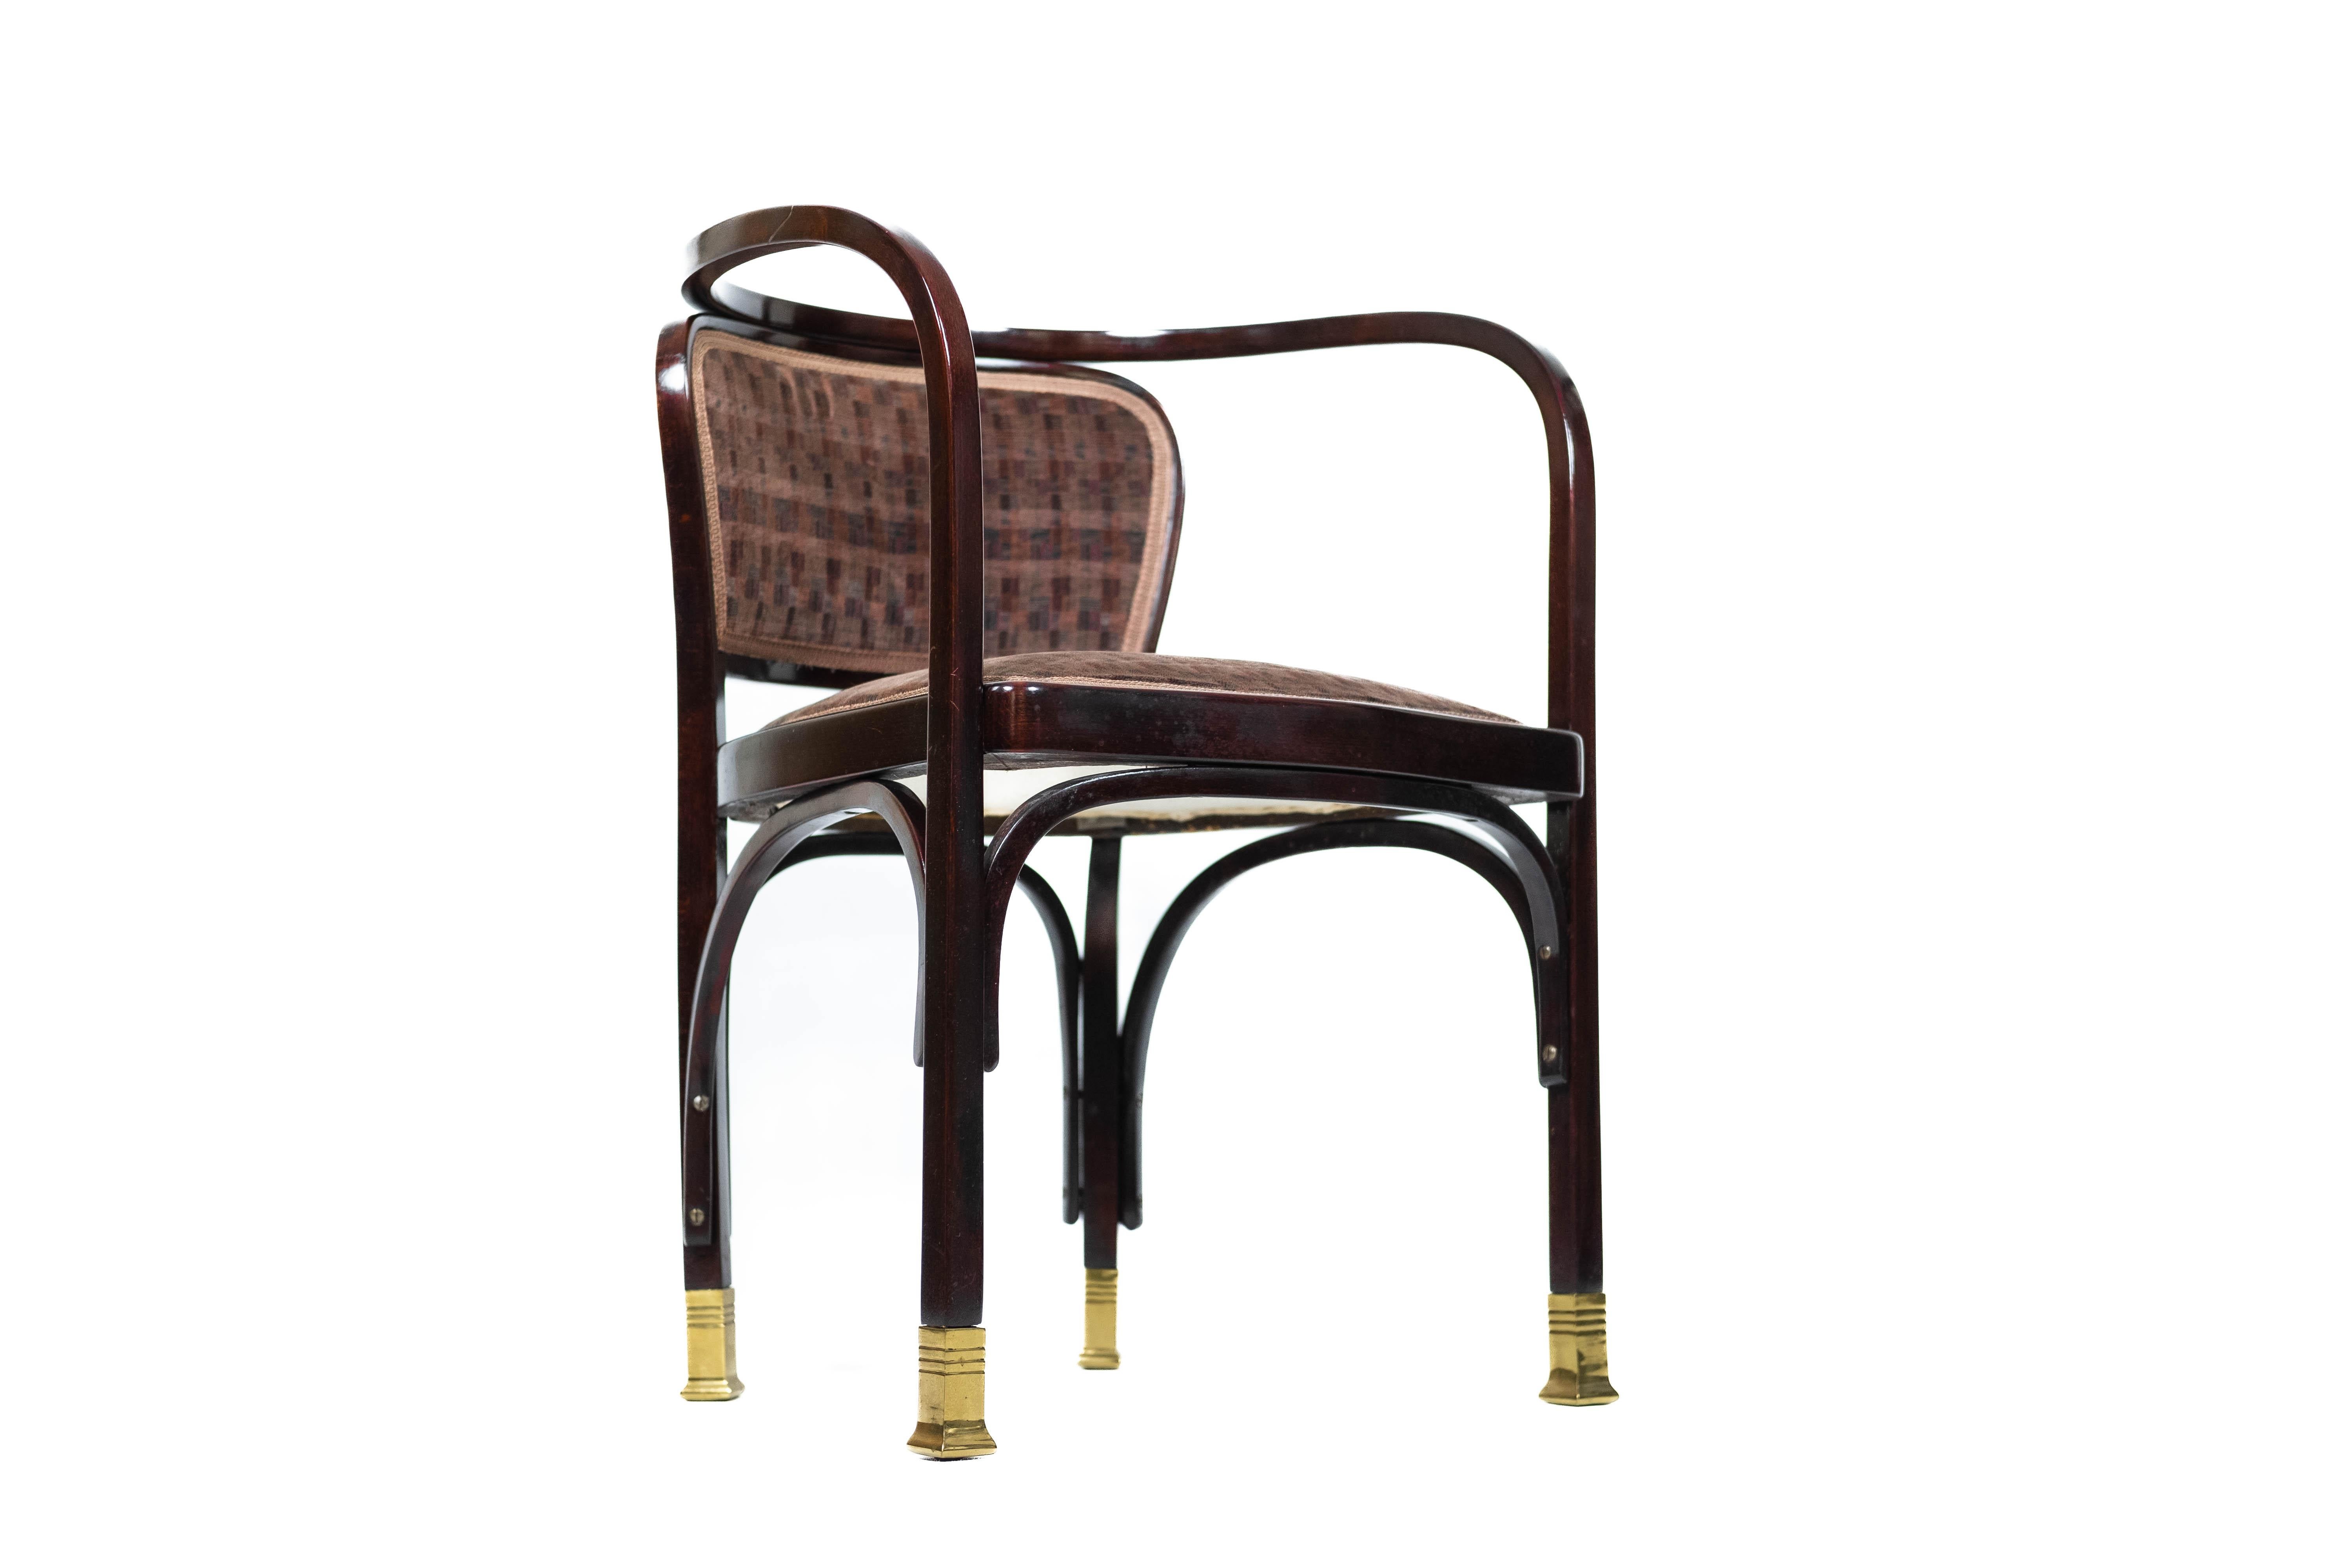 Vienna Secession Secessionistic Chairs by Gustav Siegel, ex. by J.J.Kohn (Vienna, 1900) For Sale